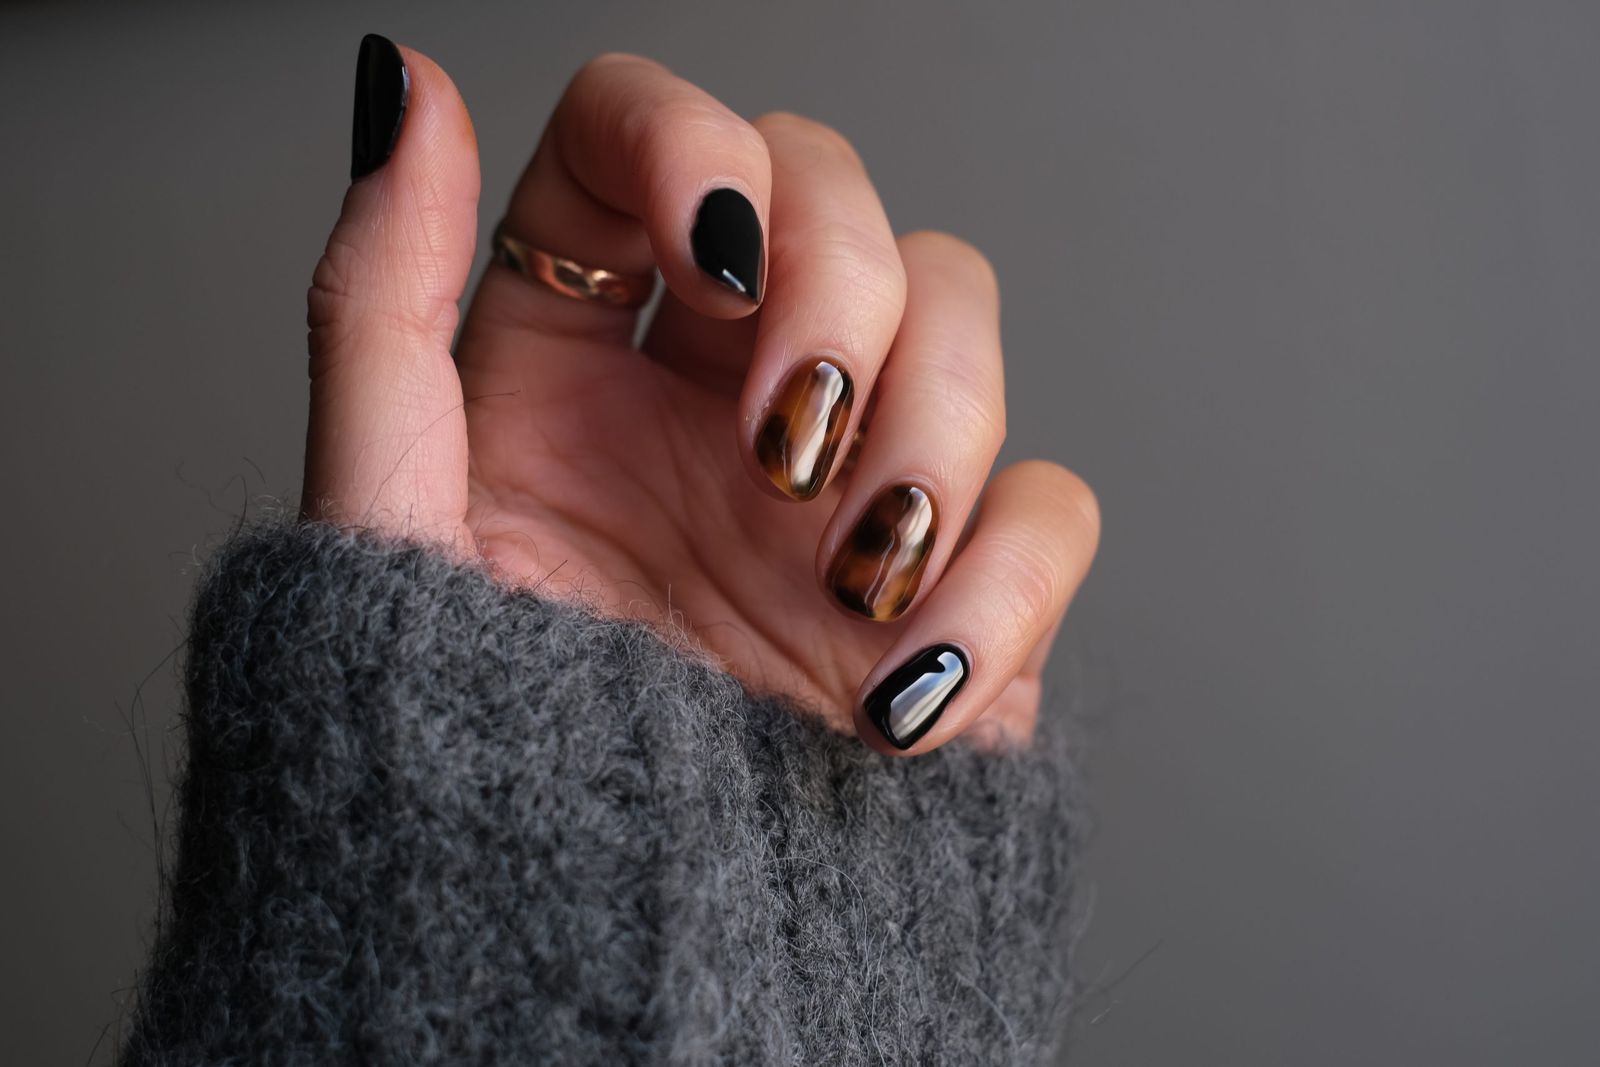 What's The Difference Between Dip Nails And Acrylics?